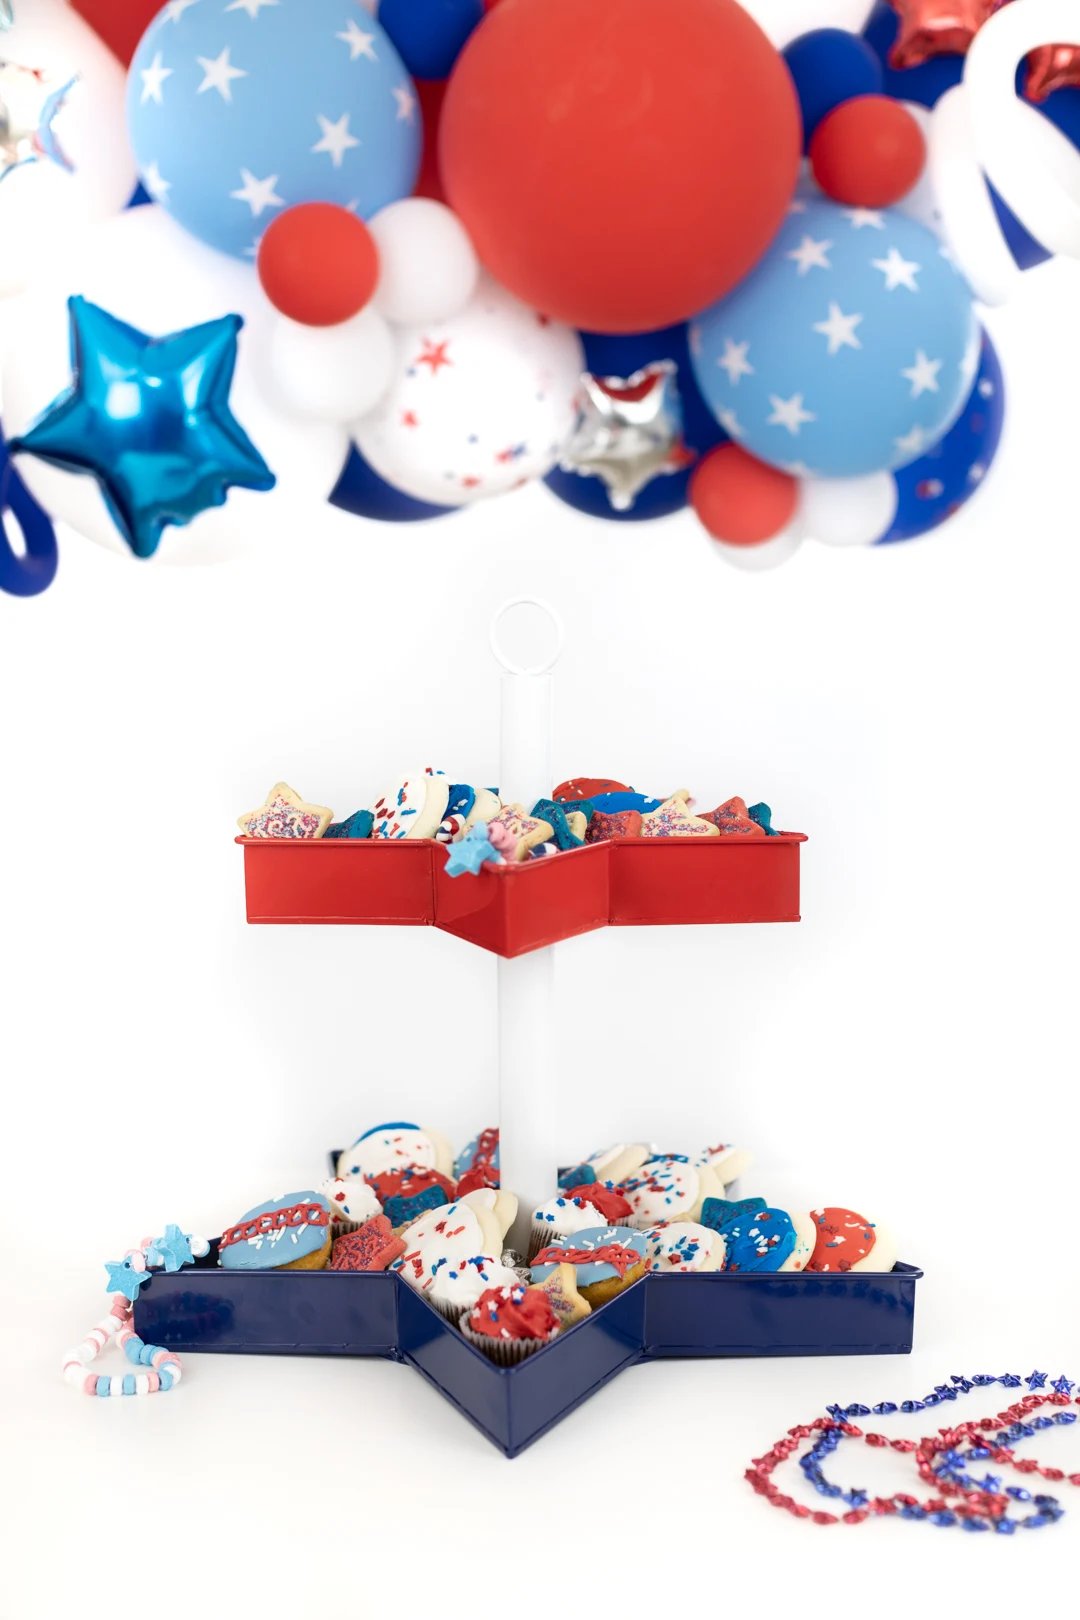 patriotic tiered serving tray filled with sweets